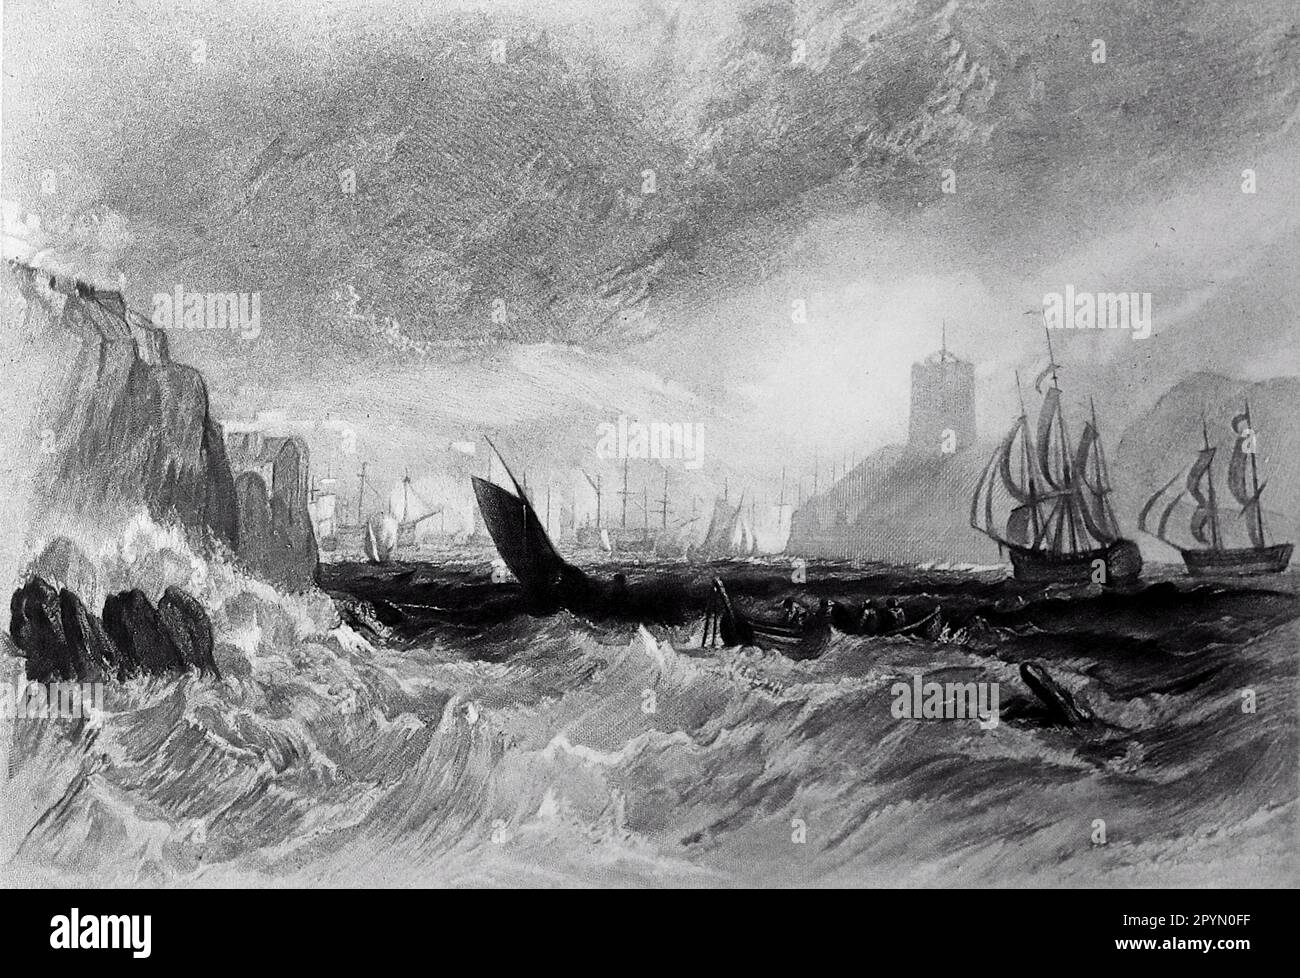 An engraving by J.M.W. Turner: Catwater. Now known as Cattewater. Engraving of ships on a violent sea with cliffs in the background. c1856. Stock Photo